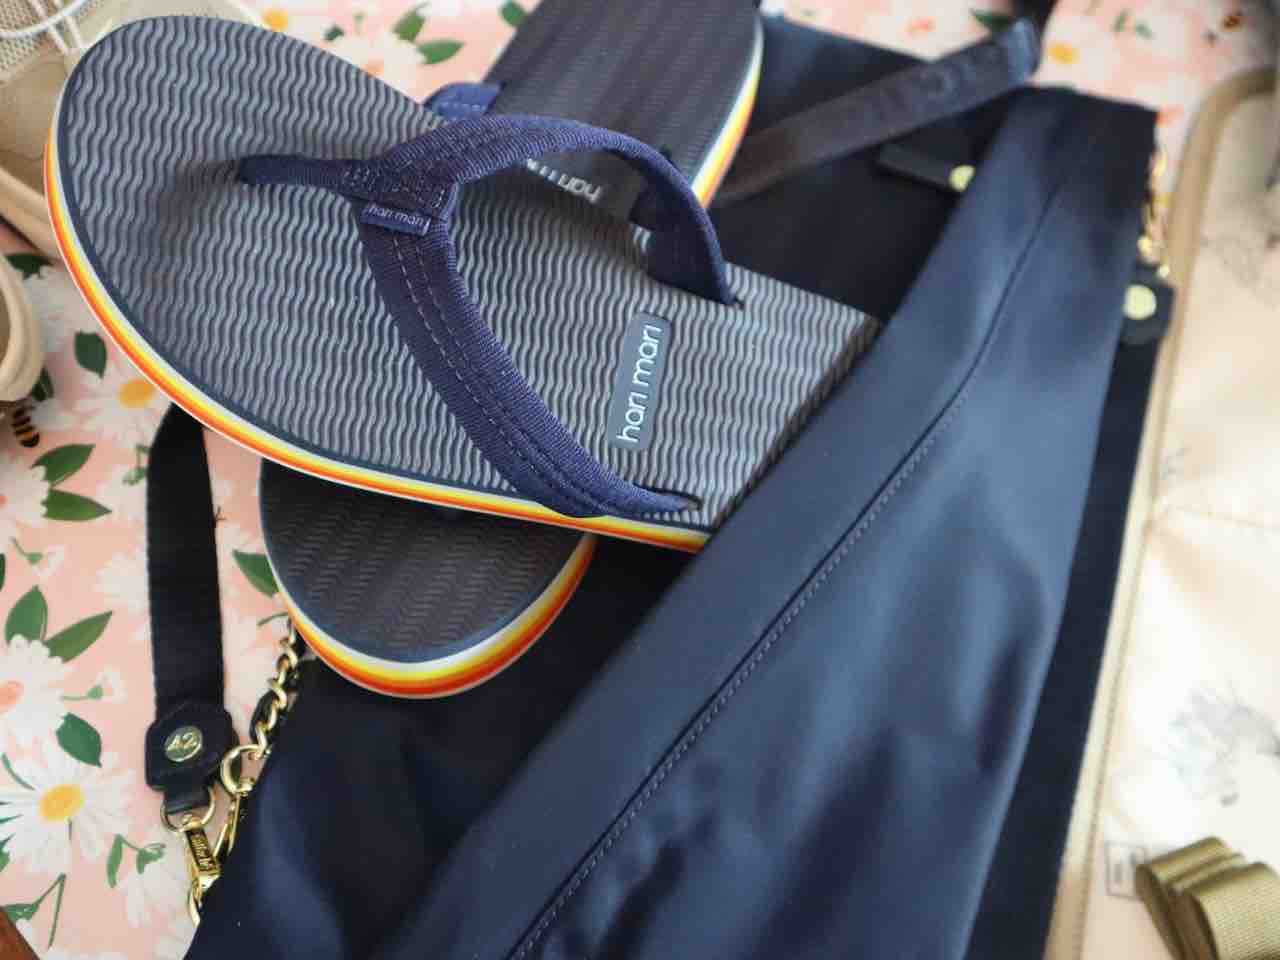 Hari Mari Dunes Sunset Flip Flops Is One Of The Best Mother’s Day Gift For New Moms